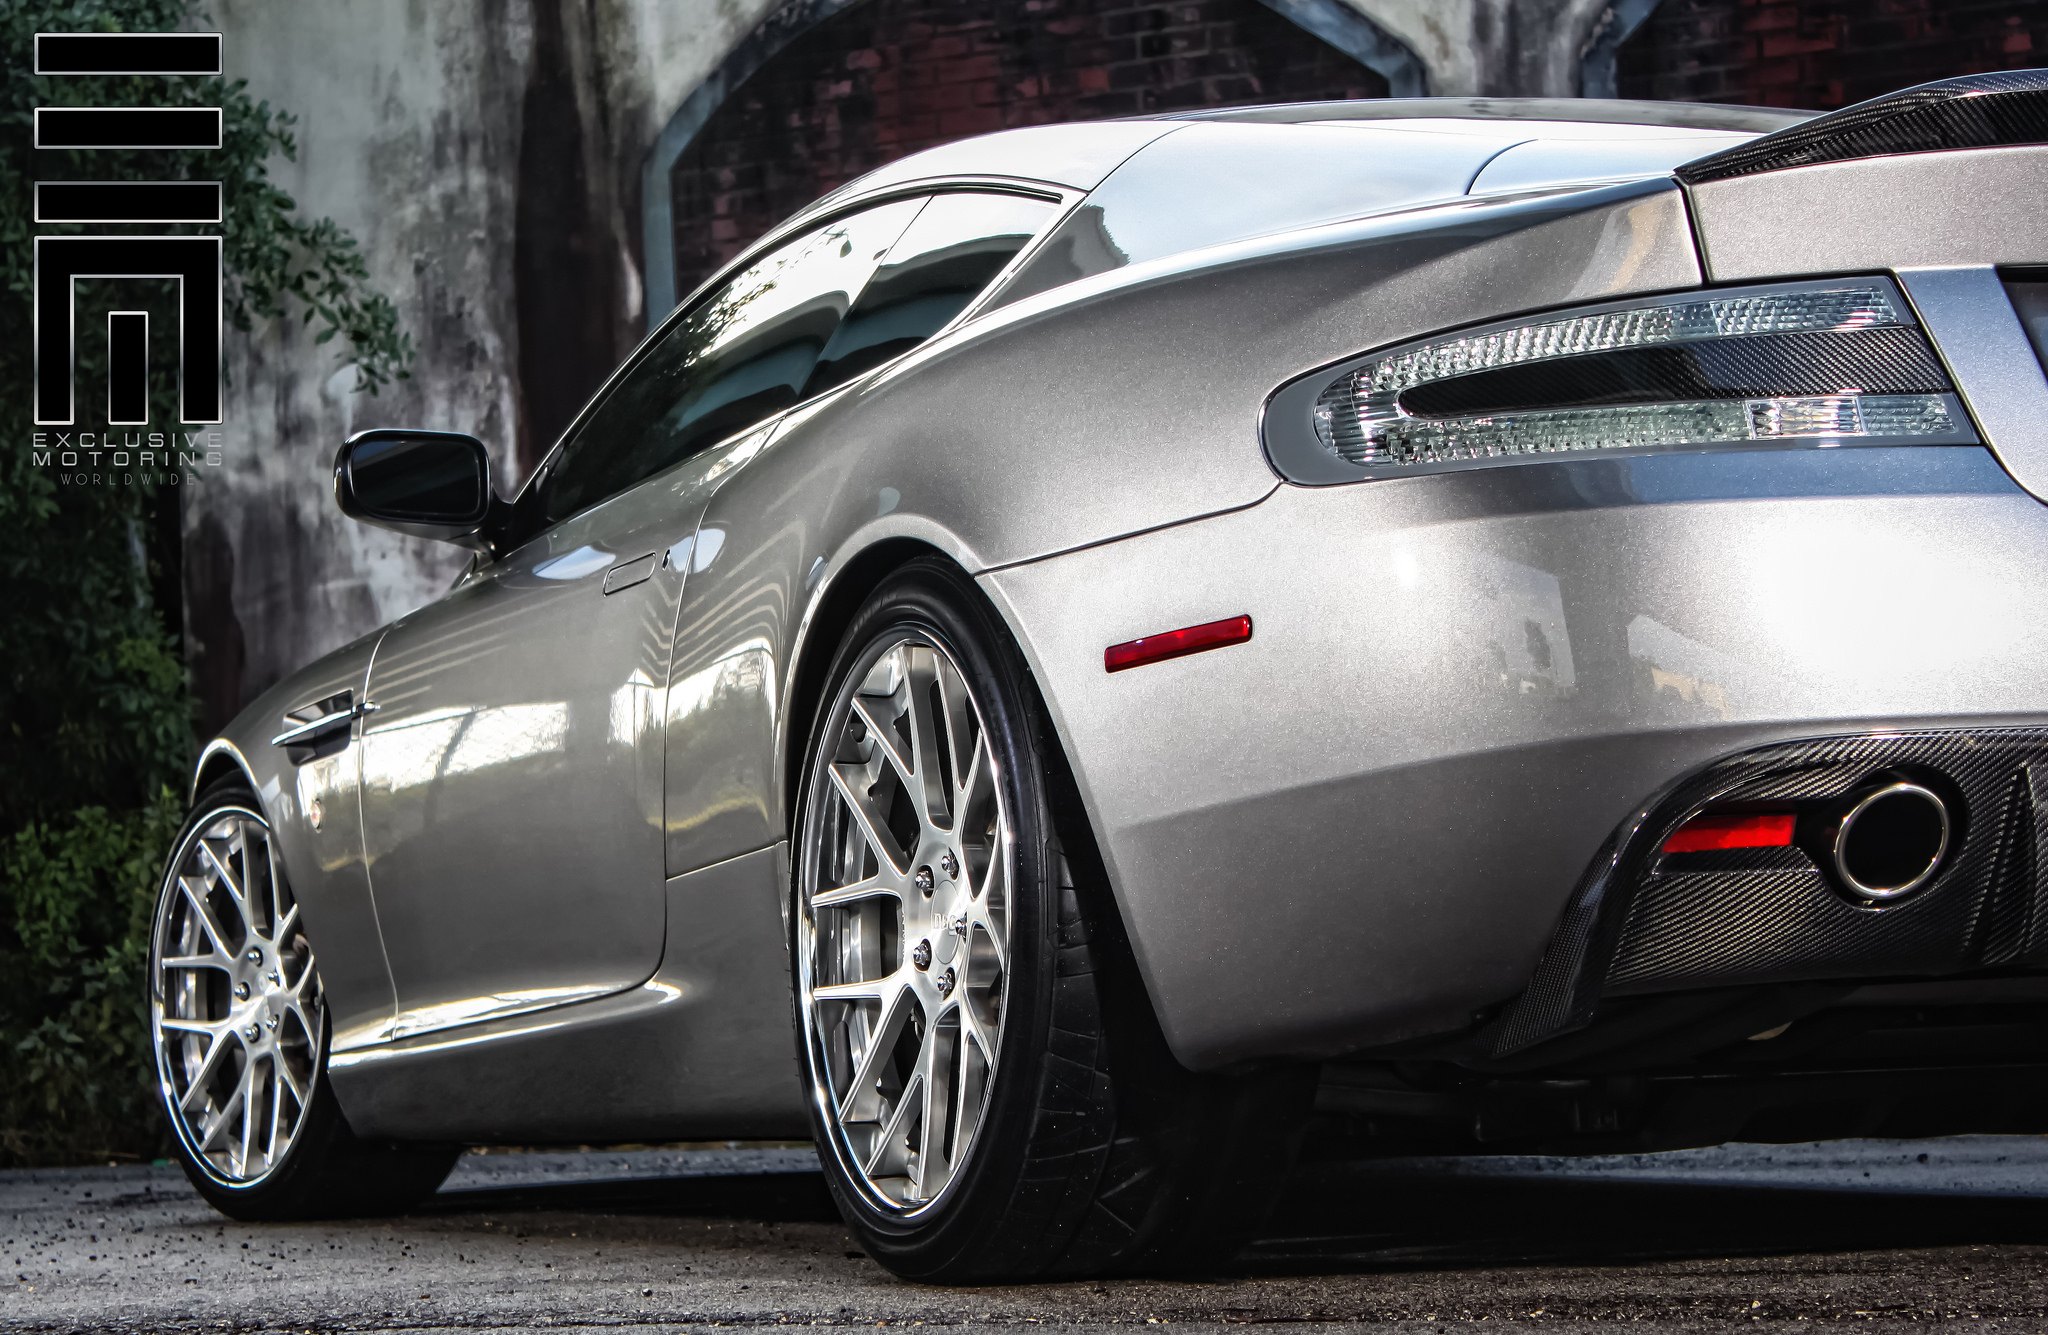 Aston Martin DB9 LED Tail Lights - Photo by Exclusive Motoring